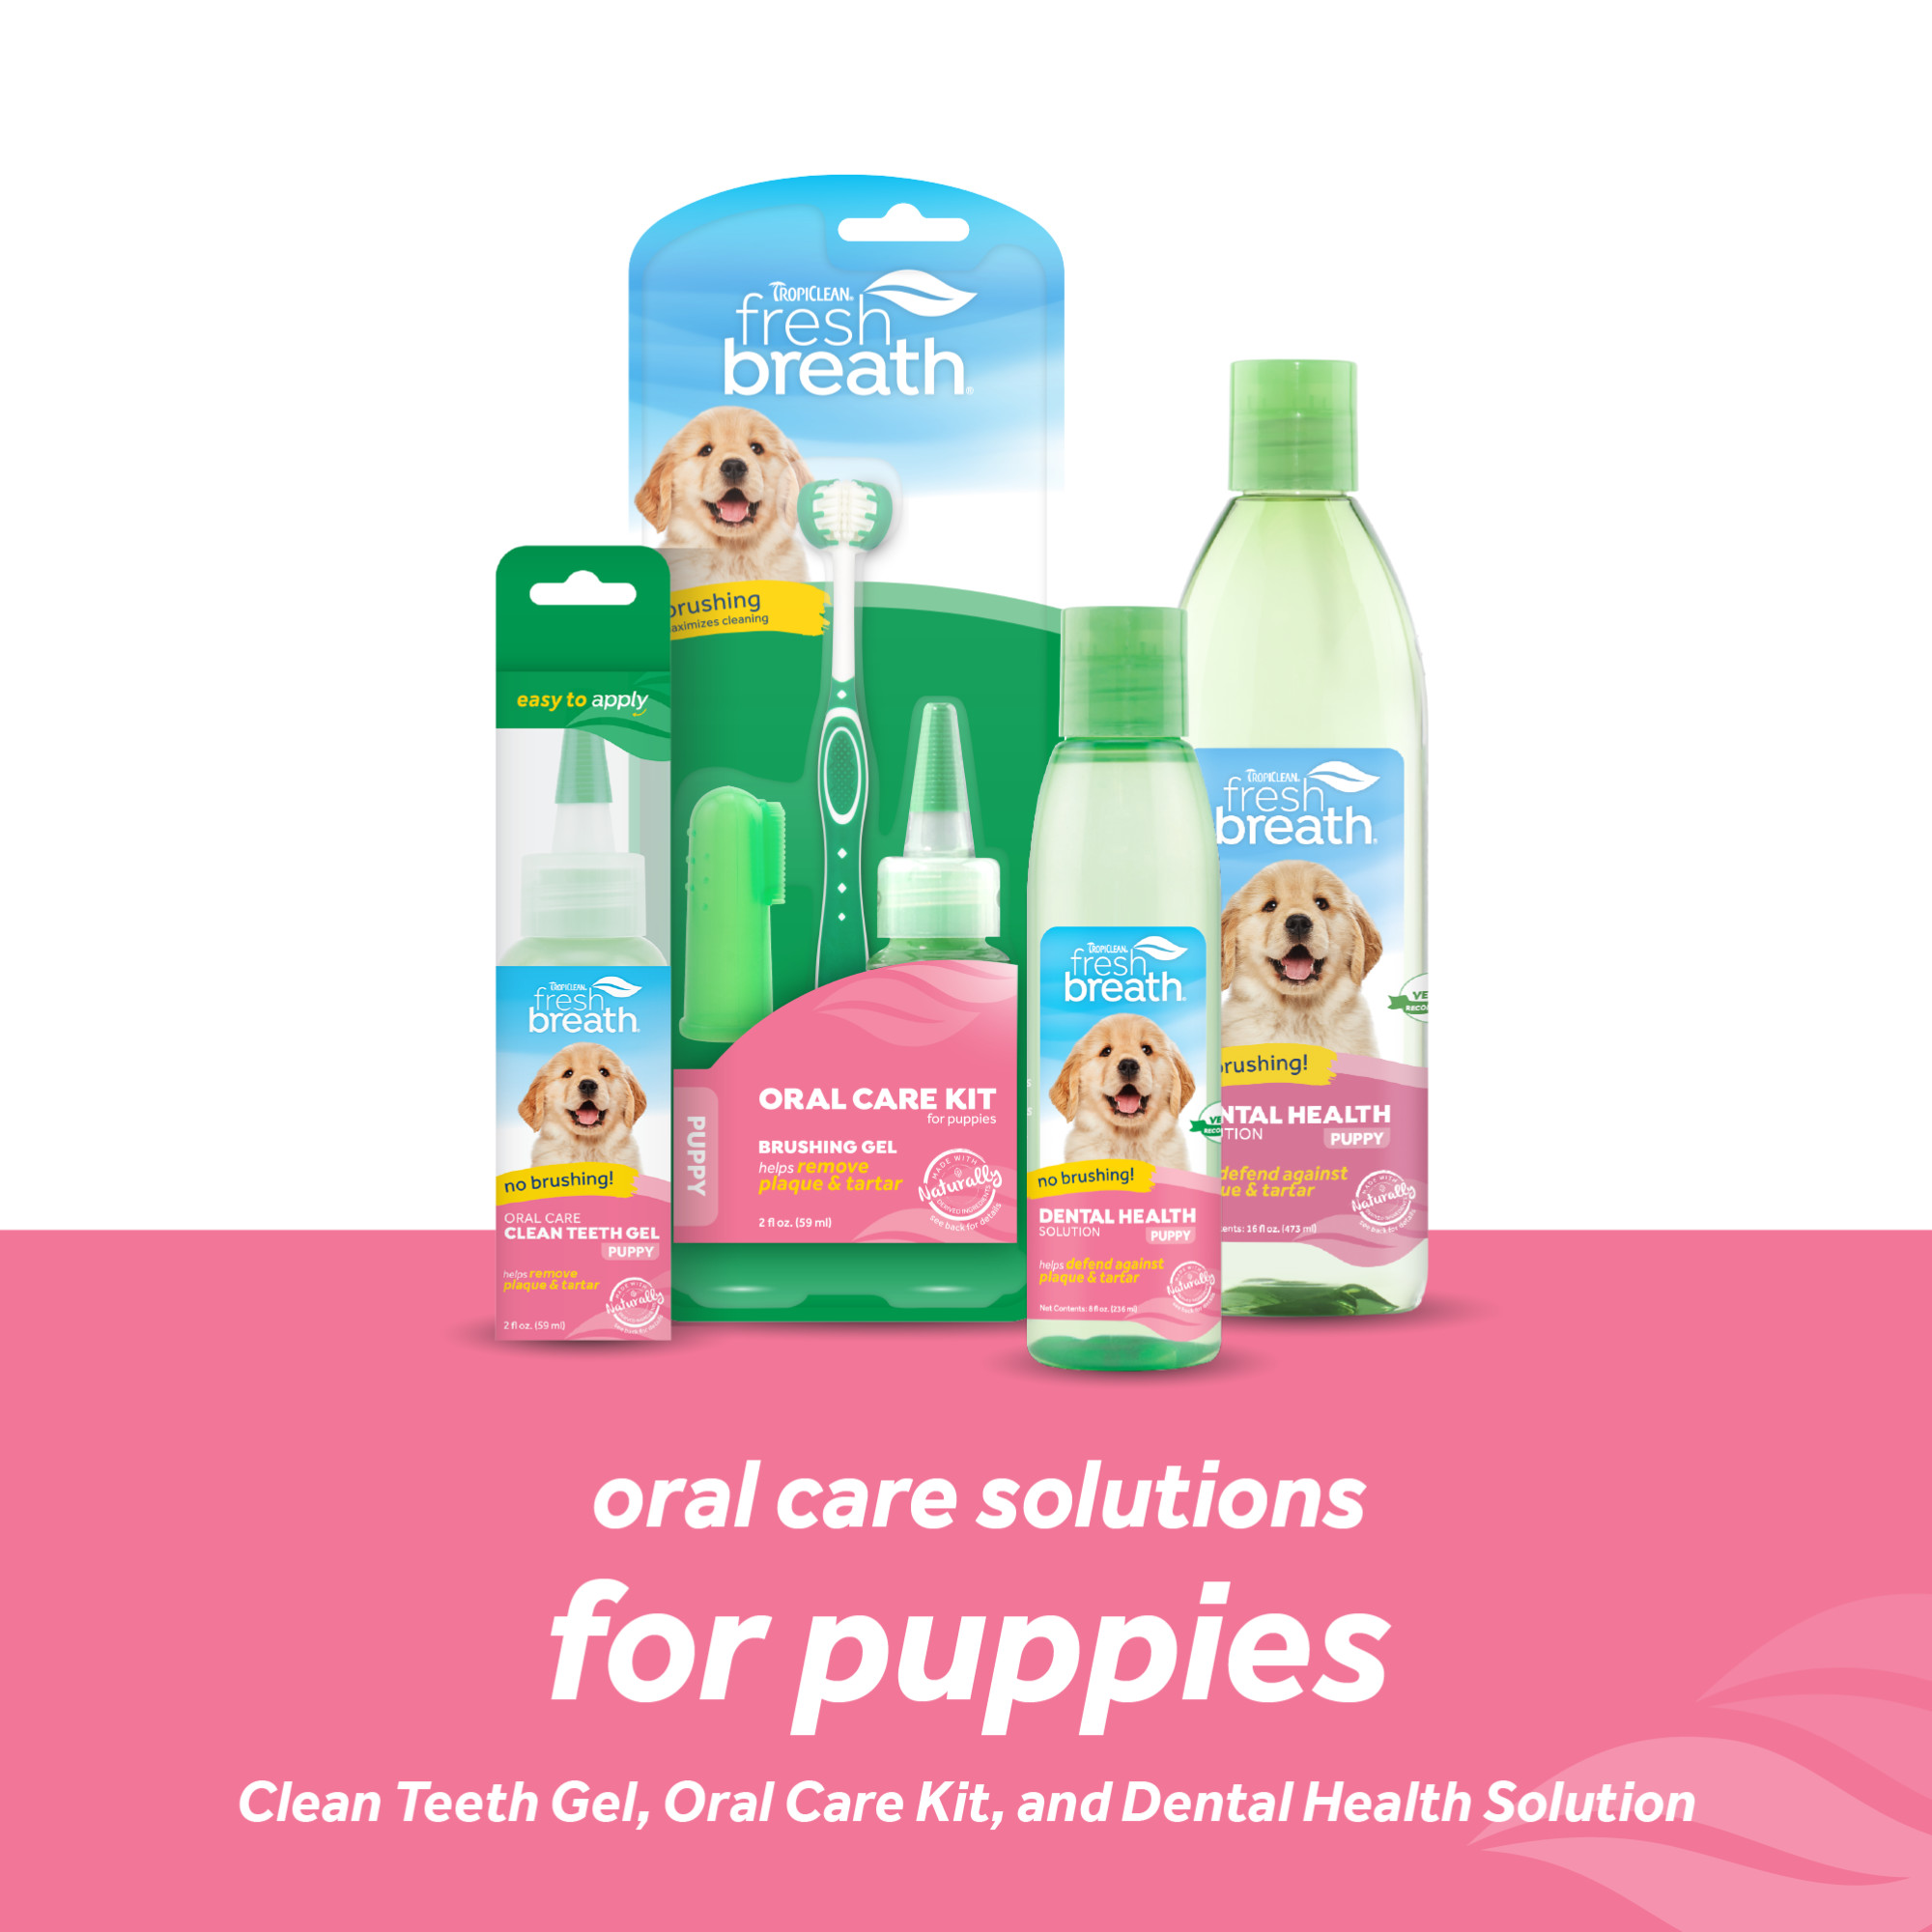 Dental Health Solution for Puppies